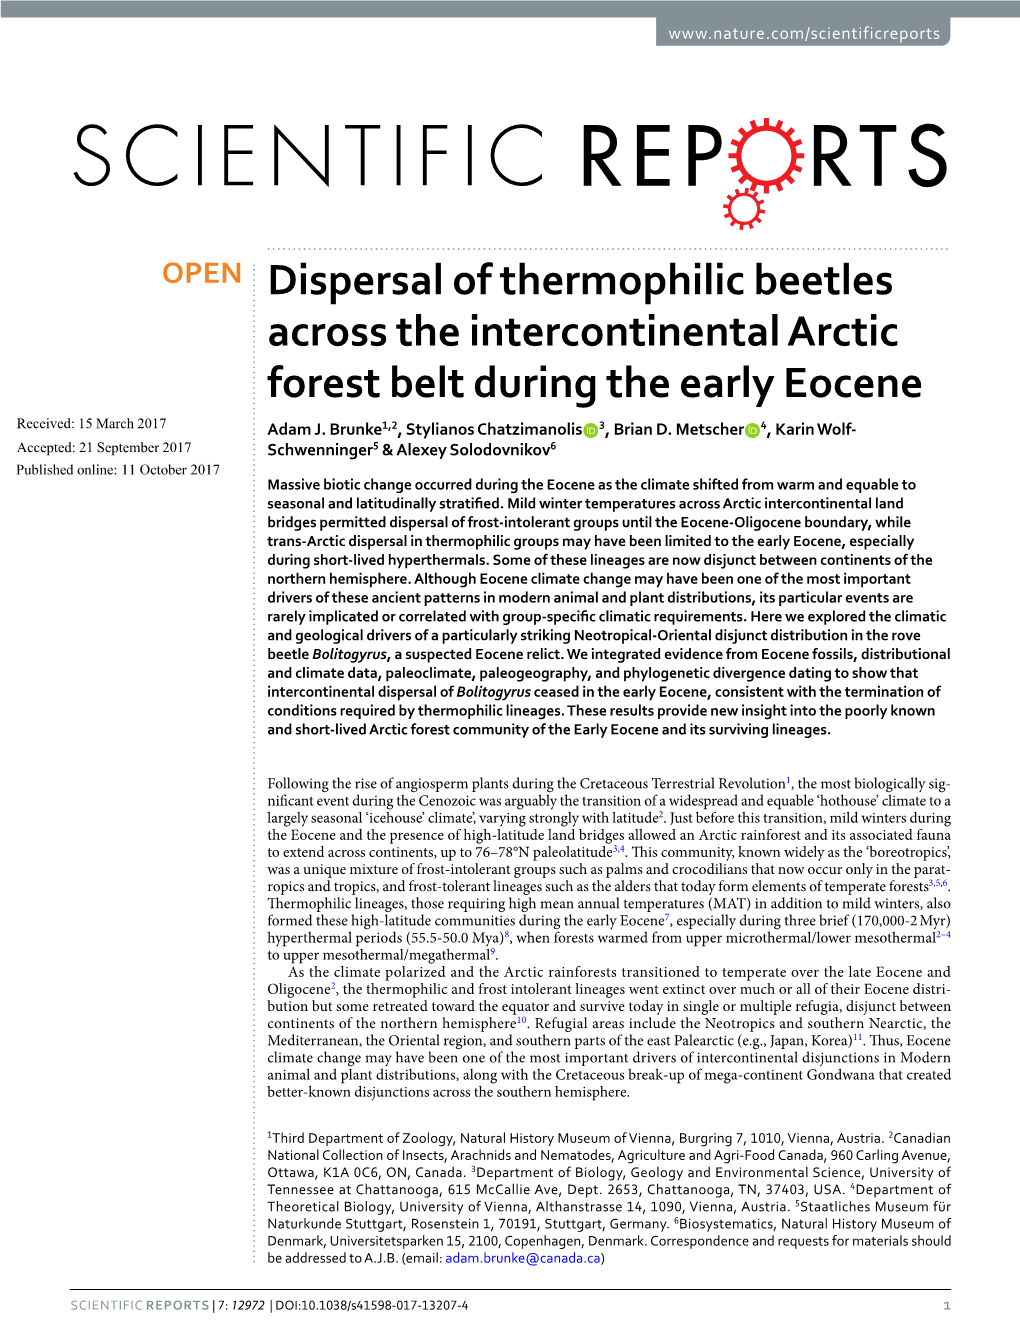 Dispersal of Thermophilic Beetles Across the Intercontinental Arctic Forest Belt During the Early Eocene Received: 15 March 2017 Adam J